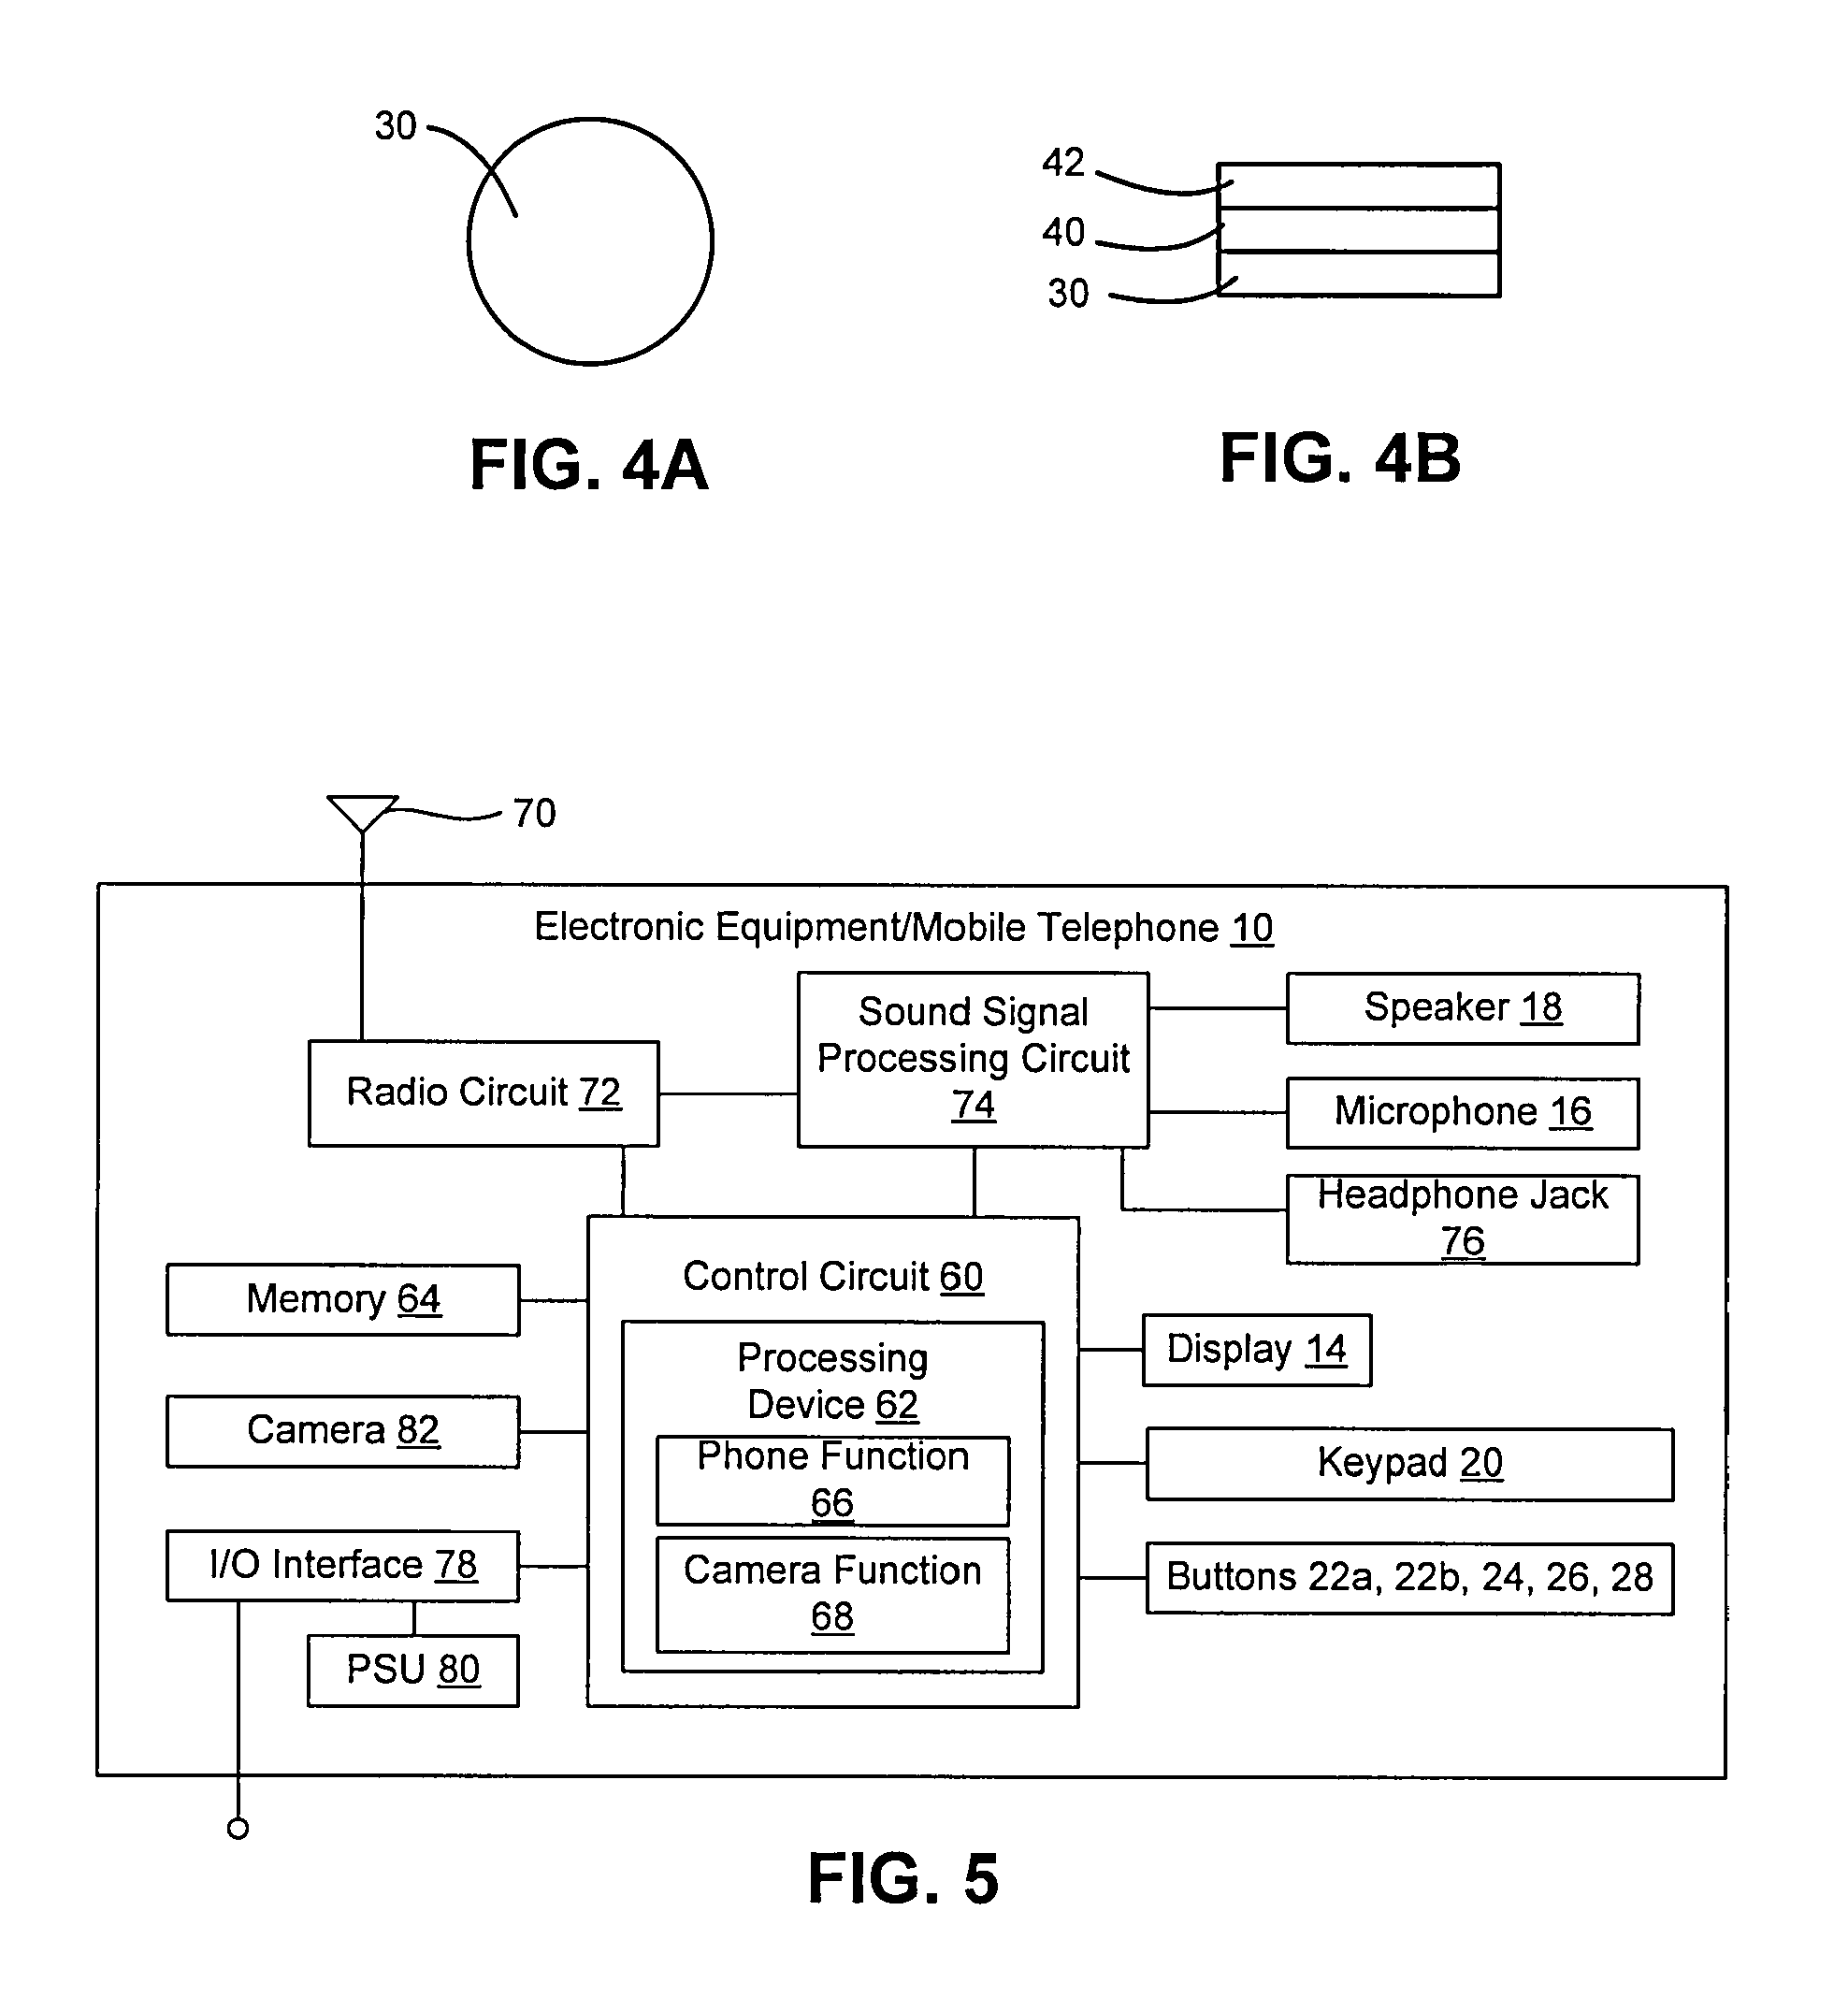 Thin active camera cover for an electronic device